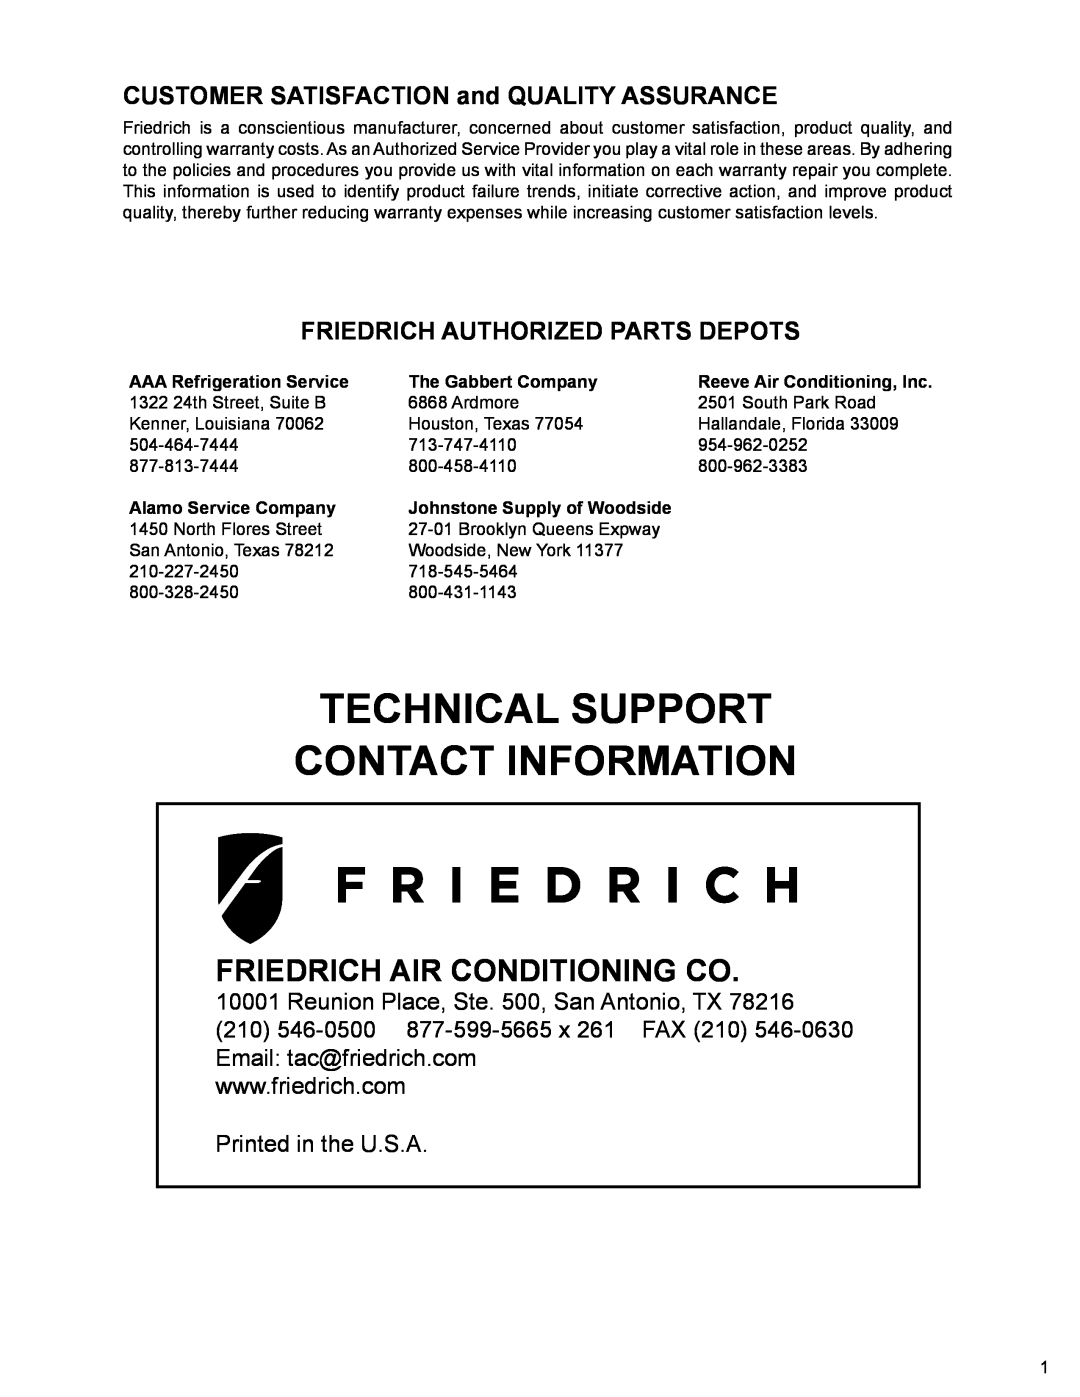 Friedrich MR09Y3H Technical Support Contact Information, CUSTOMER SATISFACTION and QUALITY ASSURANCE, The Gabbert Company 